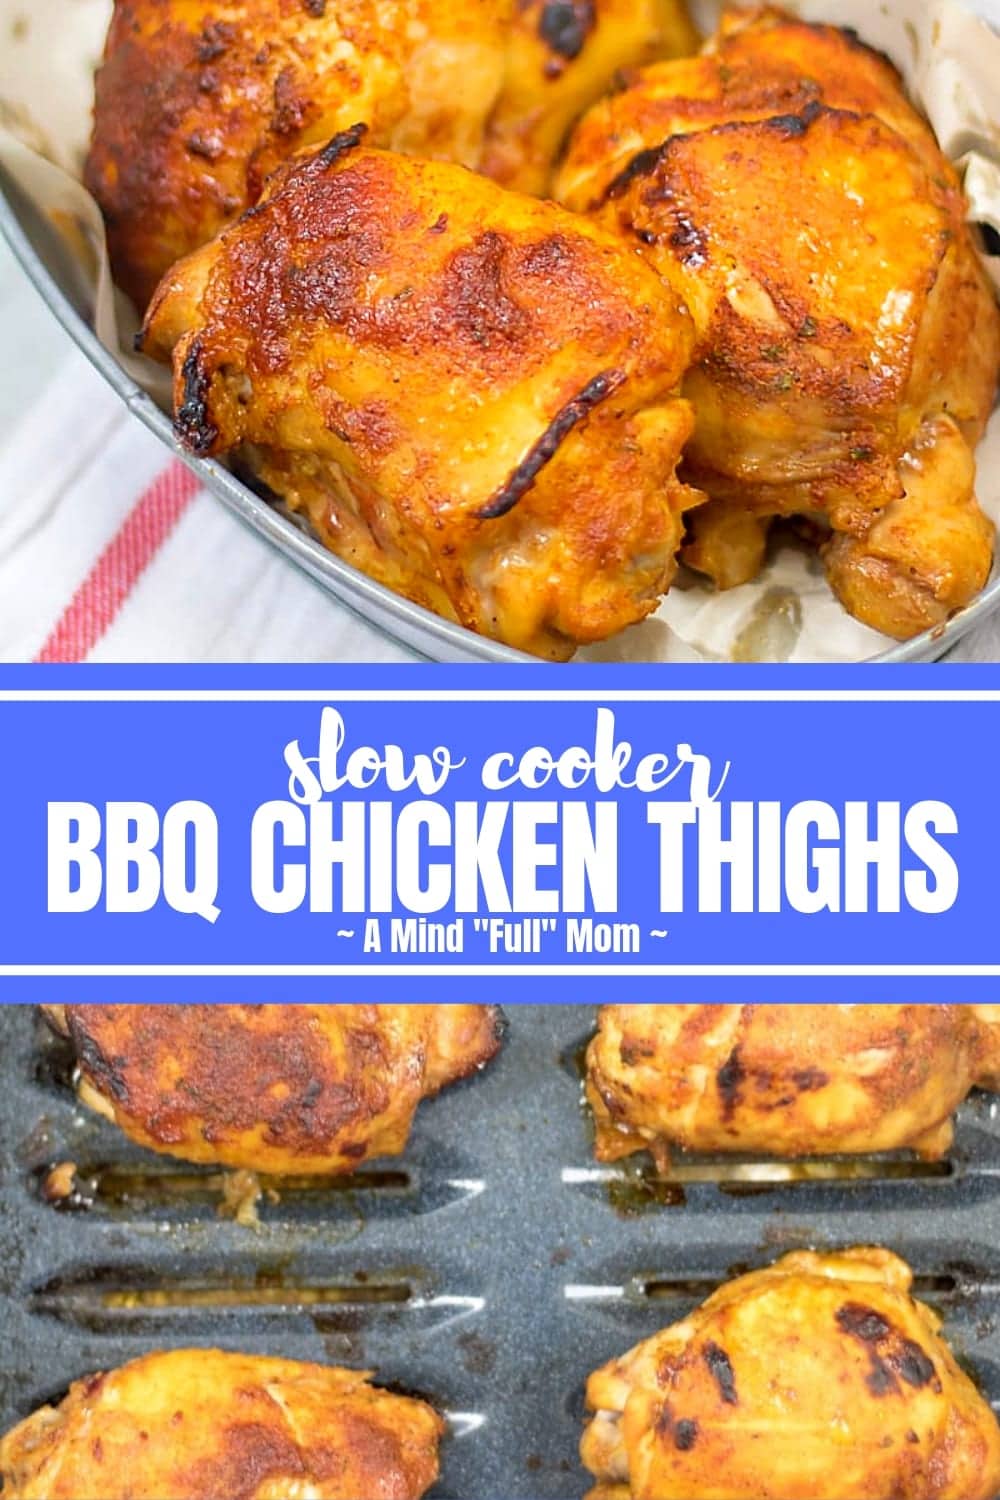 Perfectly seasoned chicken thighs are cooked to juicy perfection in the crockpot in a homemade barbecue sauce for an easy, wholesome family meal.